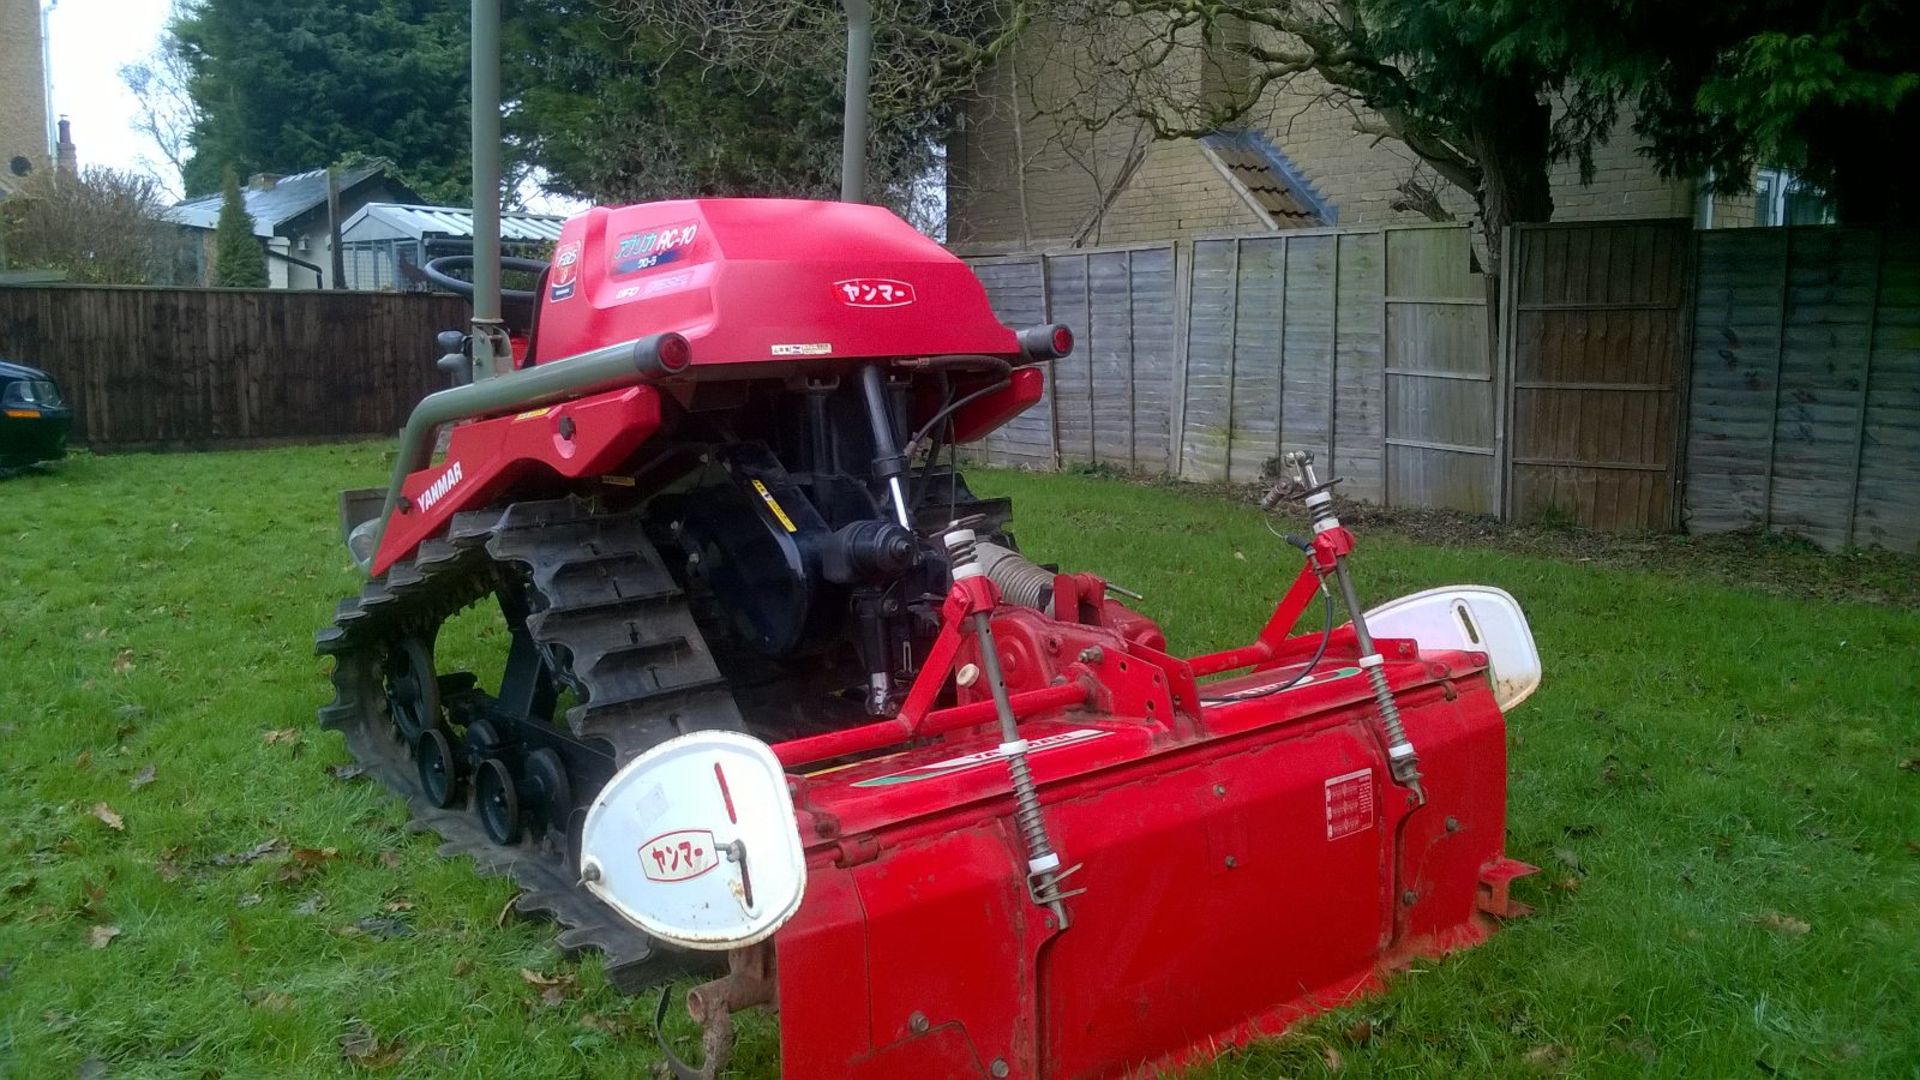 Yanmar AC10 narrow compact Crawler Tractor with Rotovator. NOTE Item located in Huntingdon, Cambs. - Image 2 of 6